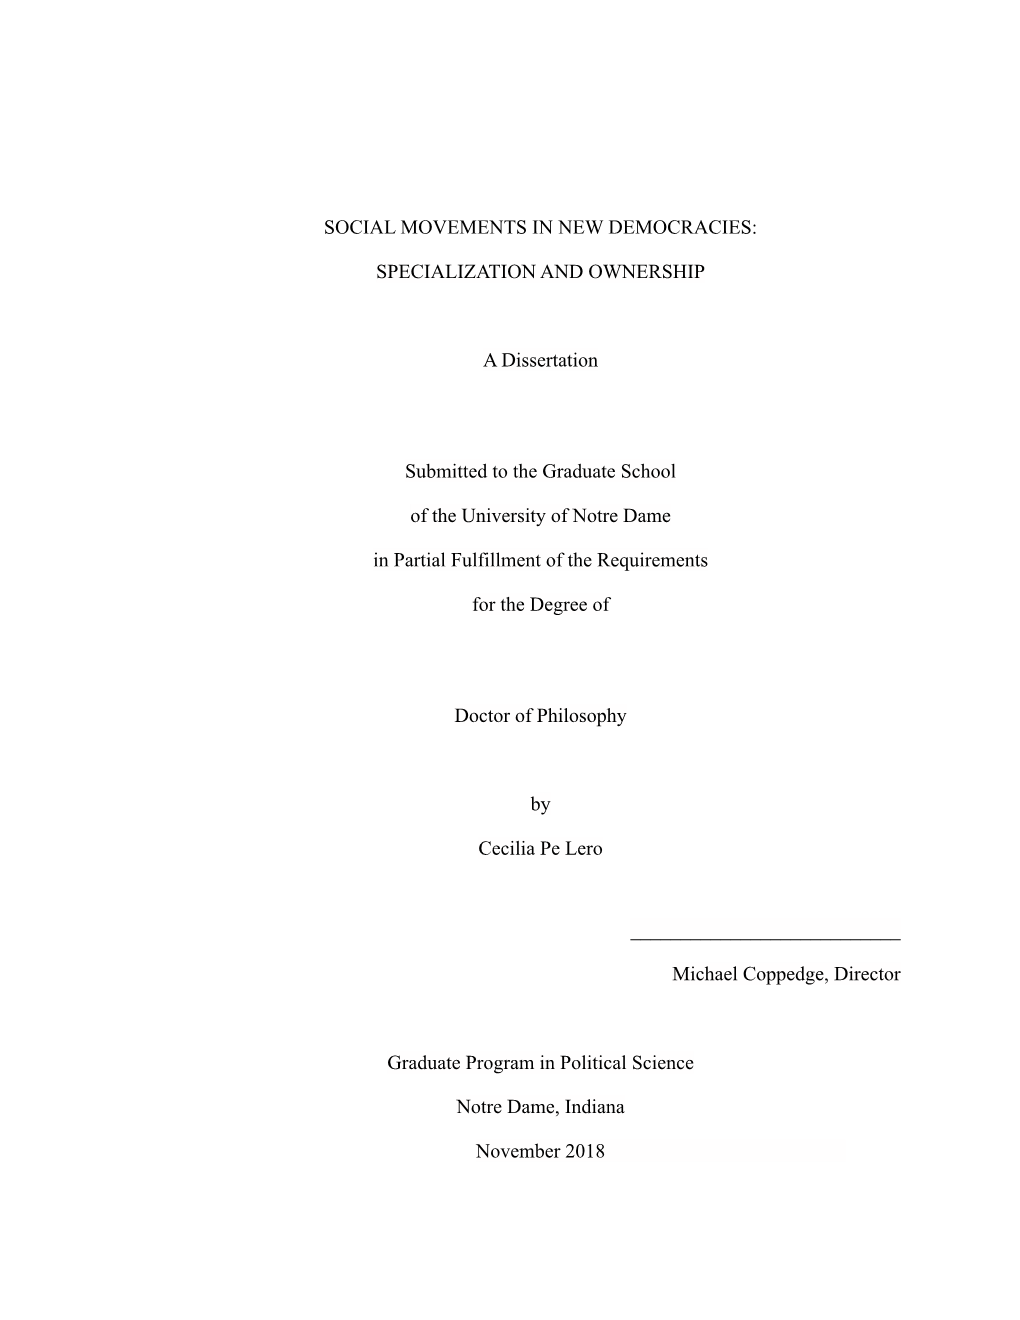 SOCIAL MOVEMENTS in NEW DEMOCRACIES: SPECIALIZATION and OWNERSHIP a Dissertation Submitted to the Graduate School of the Univers